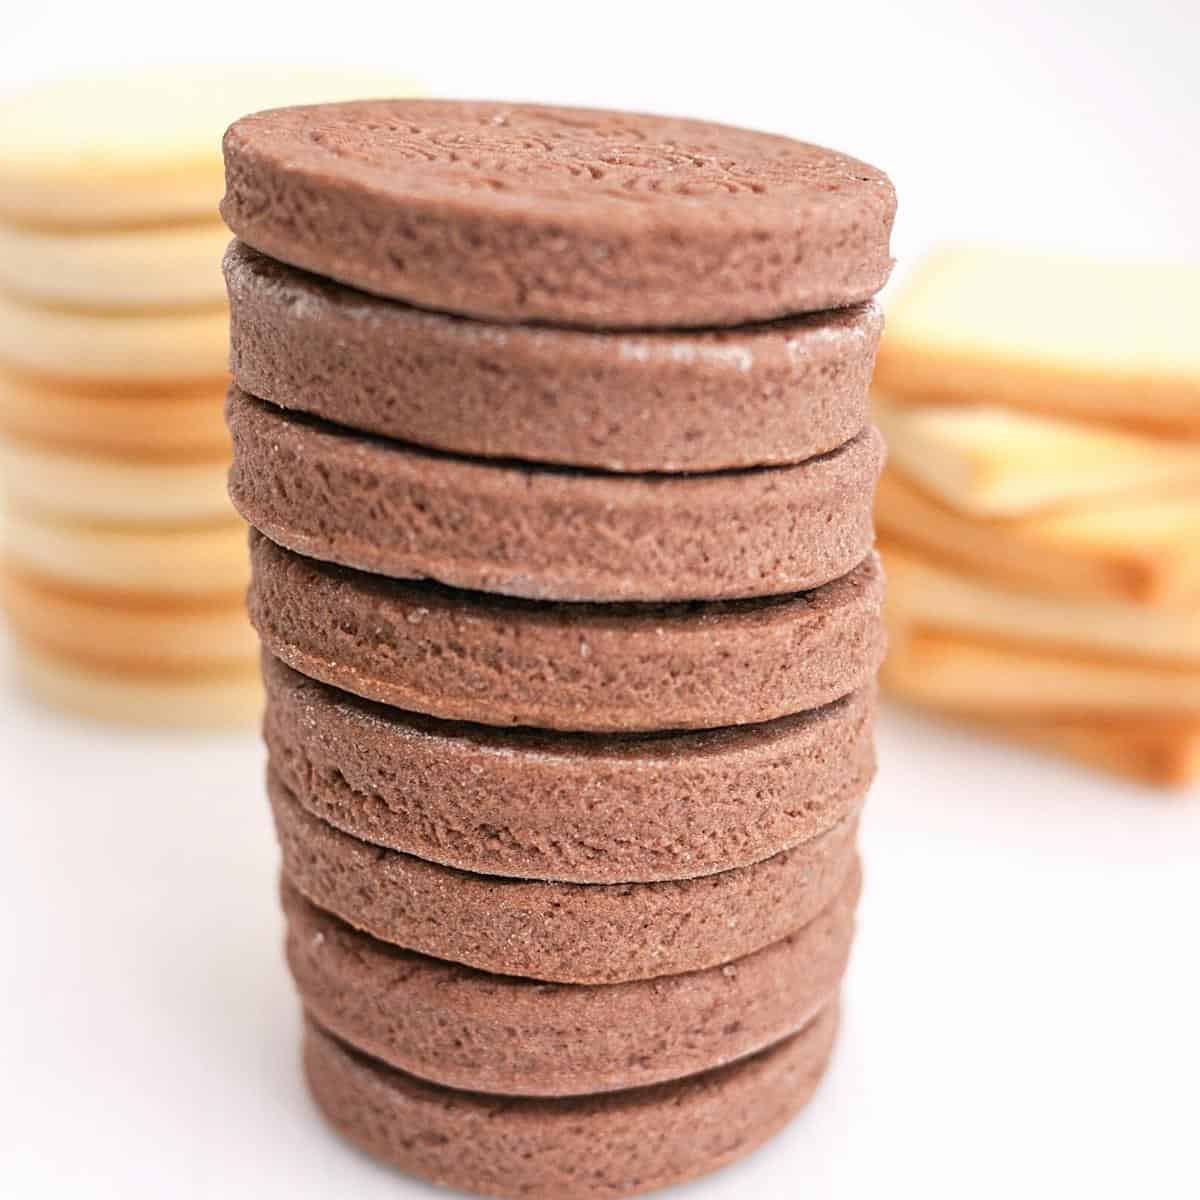 A stack of sugar cookies on the table.